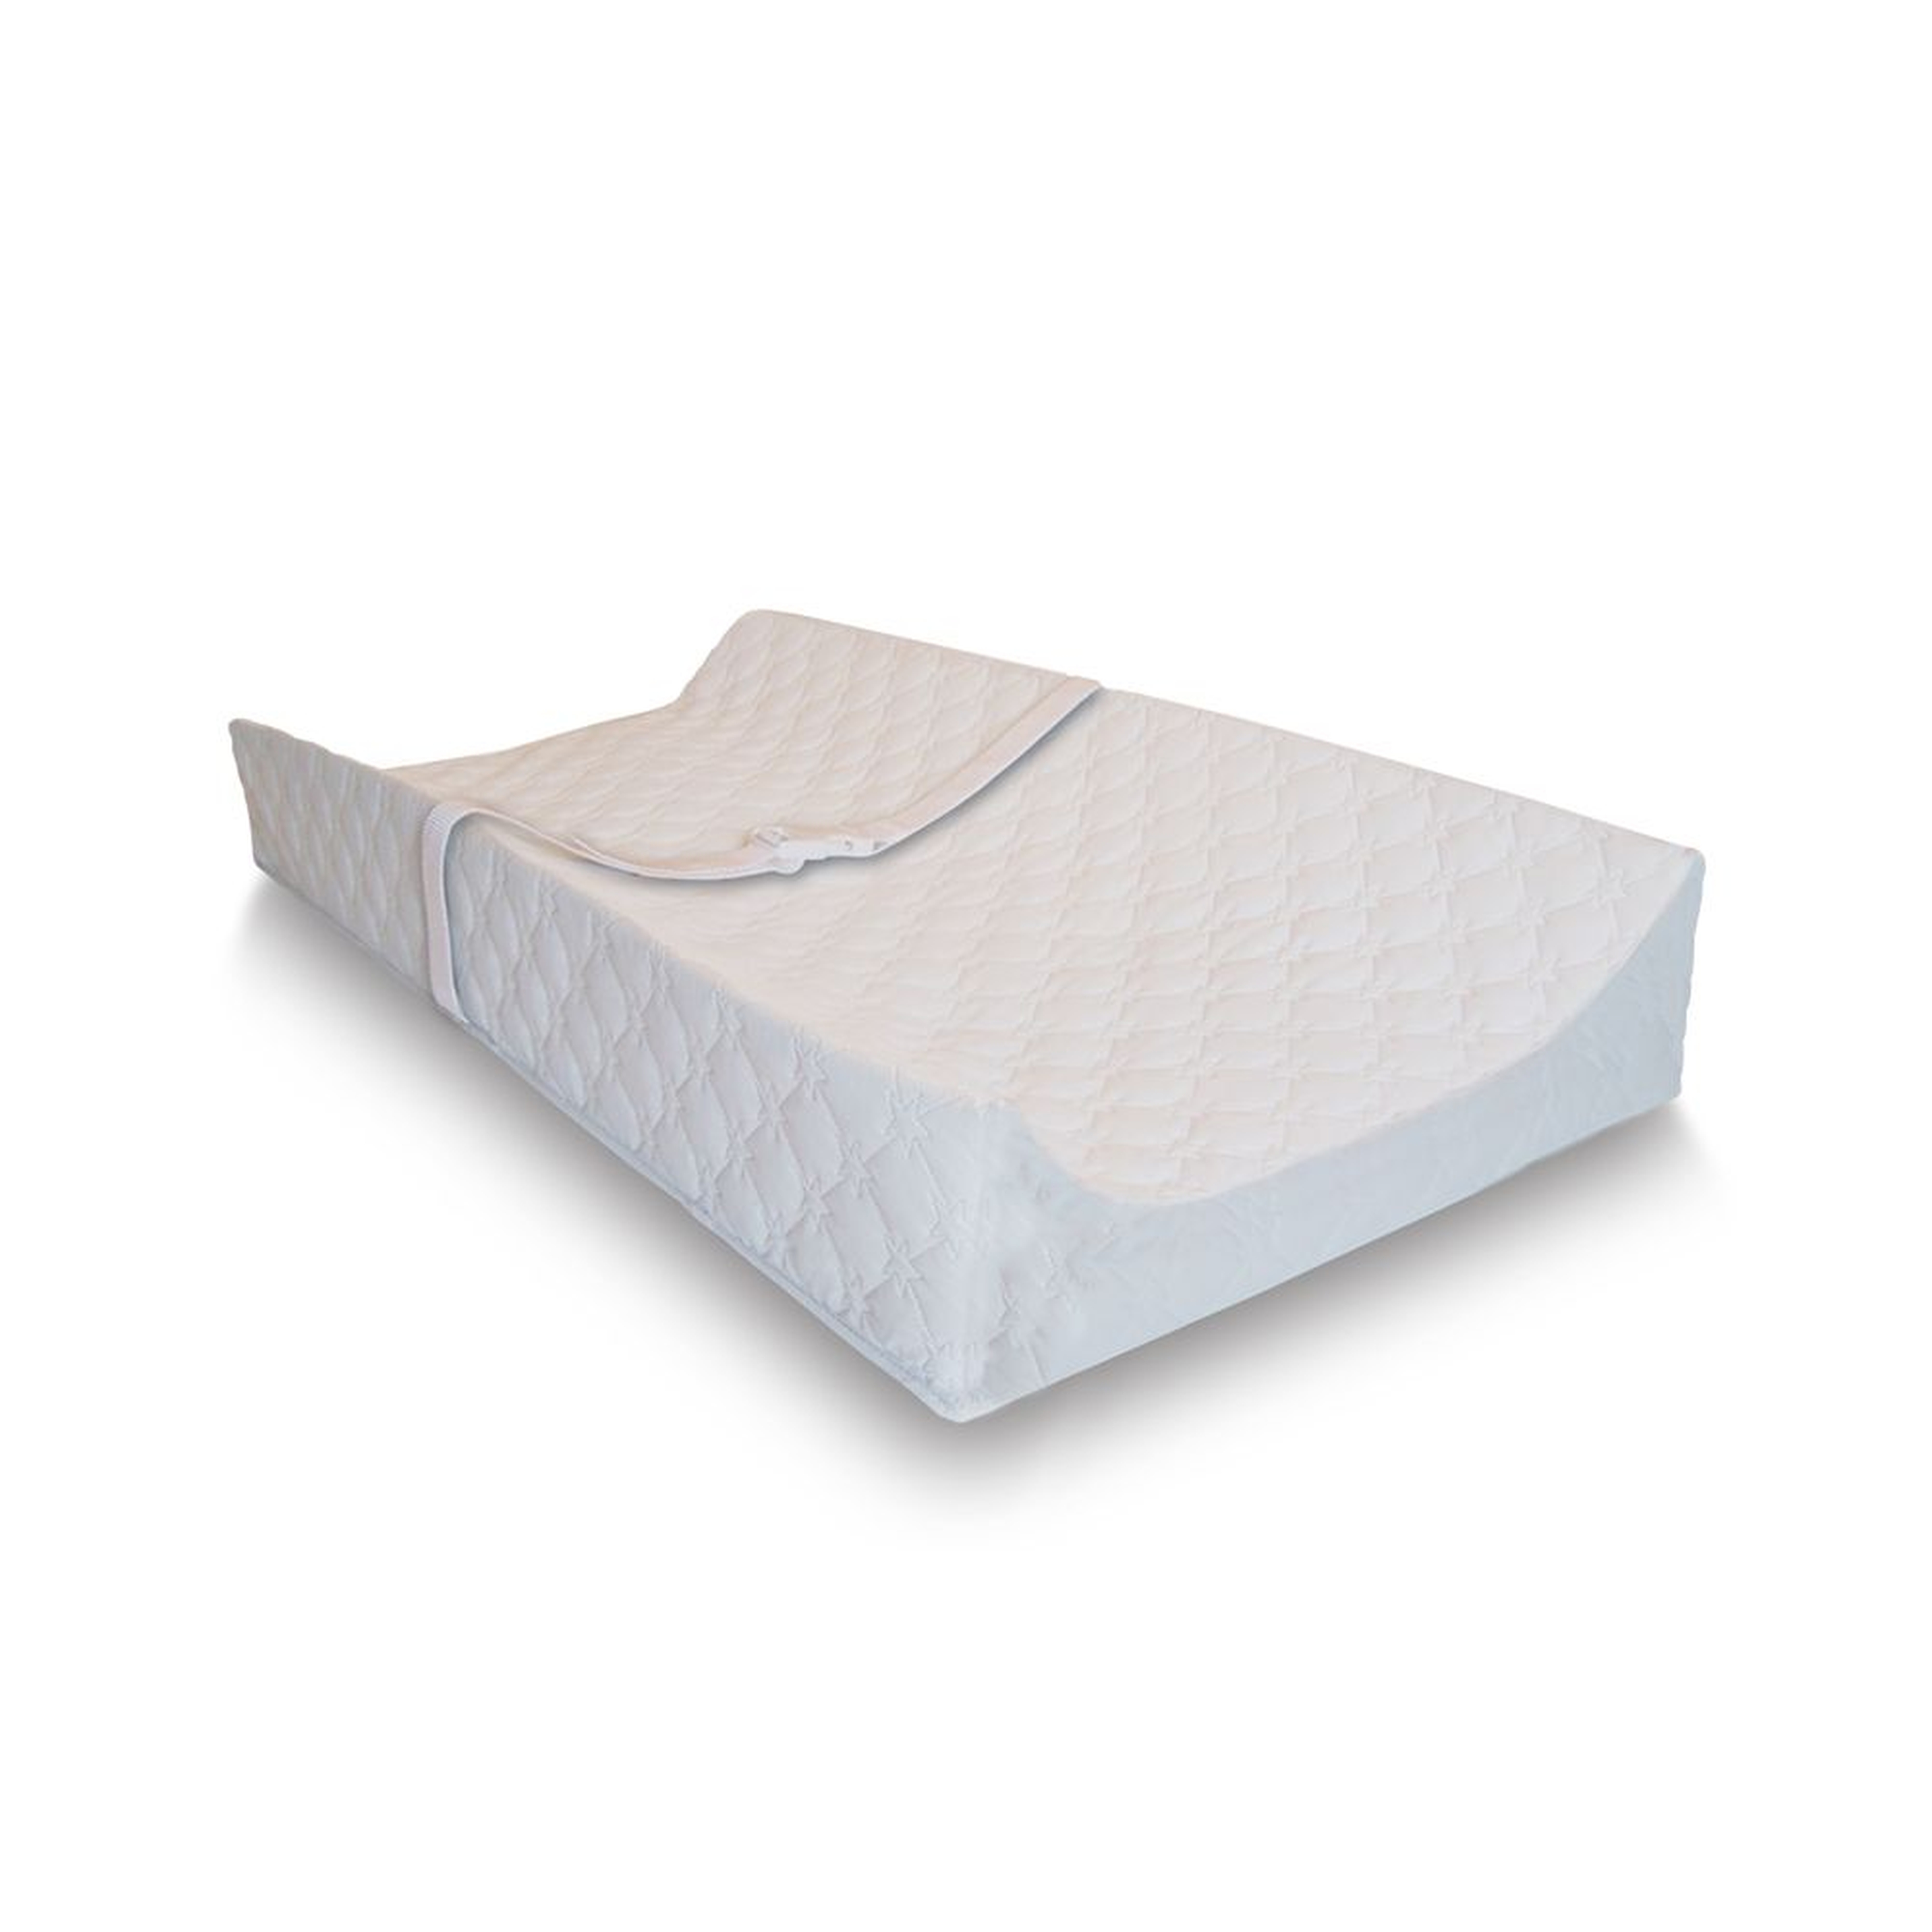 Contoured Changing Pad - Crate and Barrel